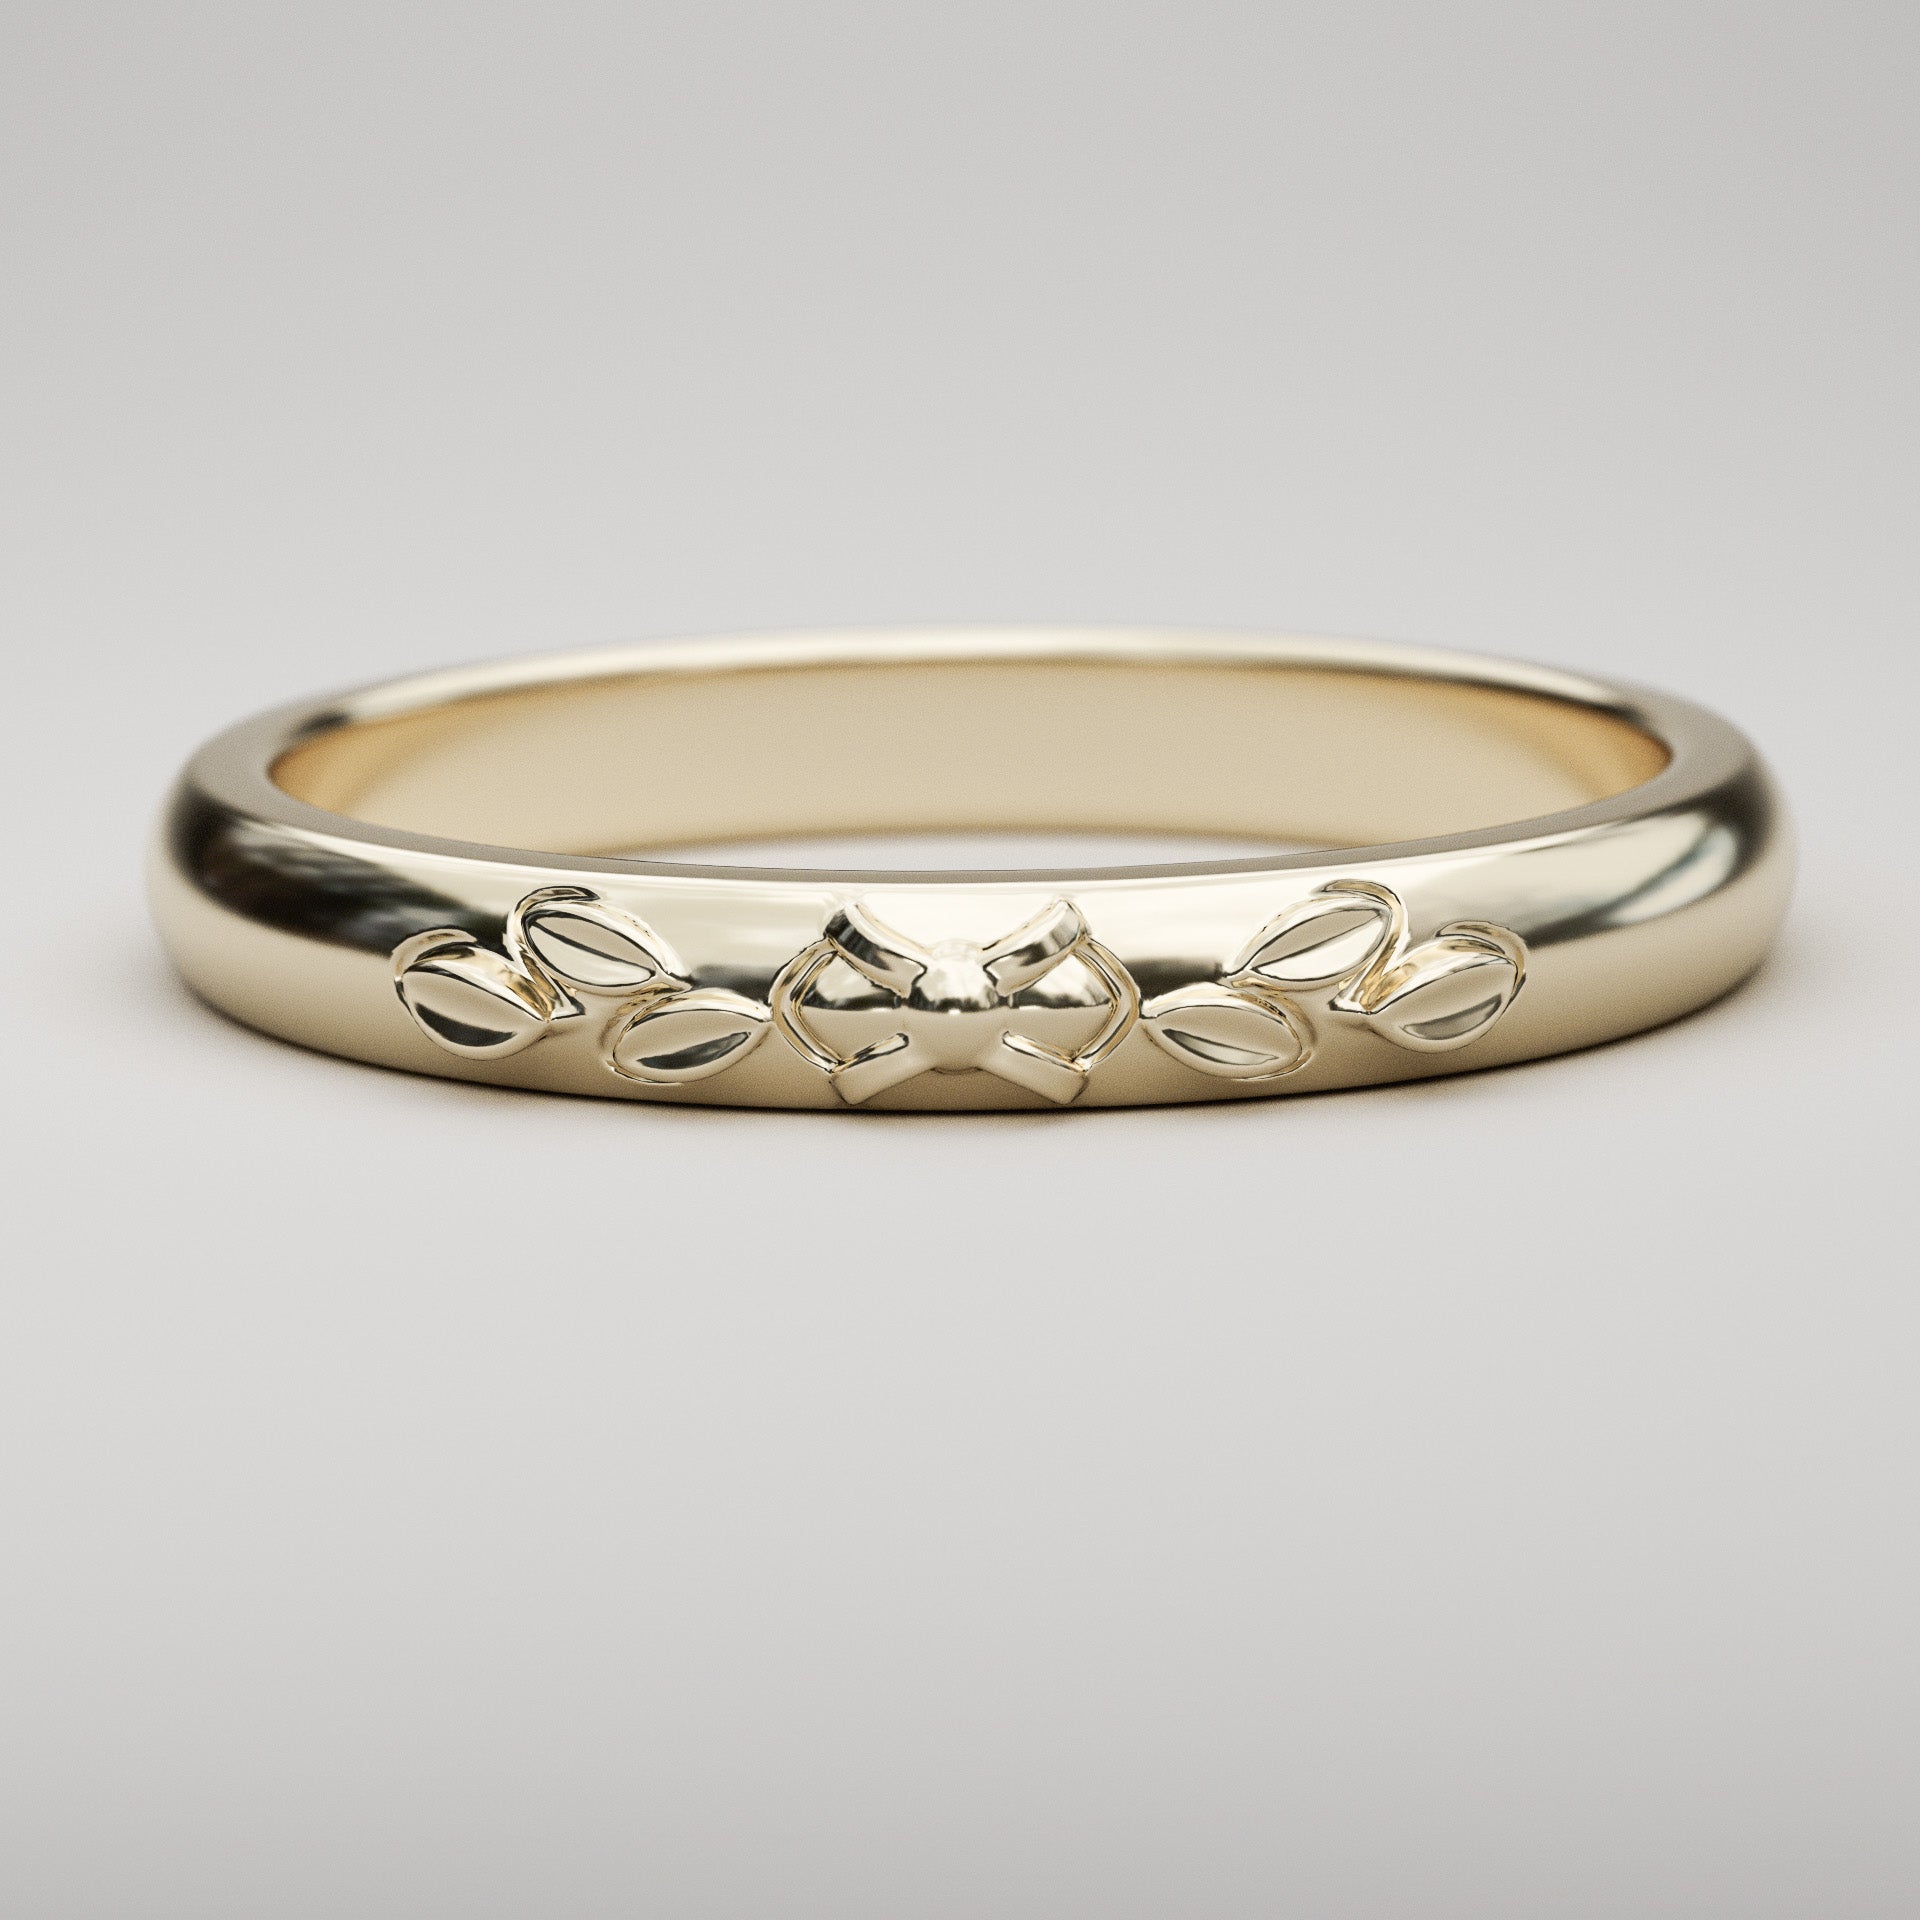 yellow gold wedding band with leaf design for woman in 14k or 18k gold